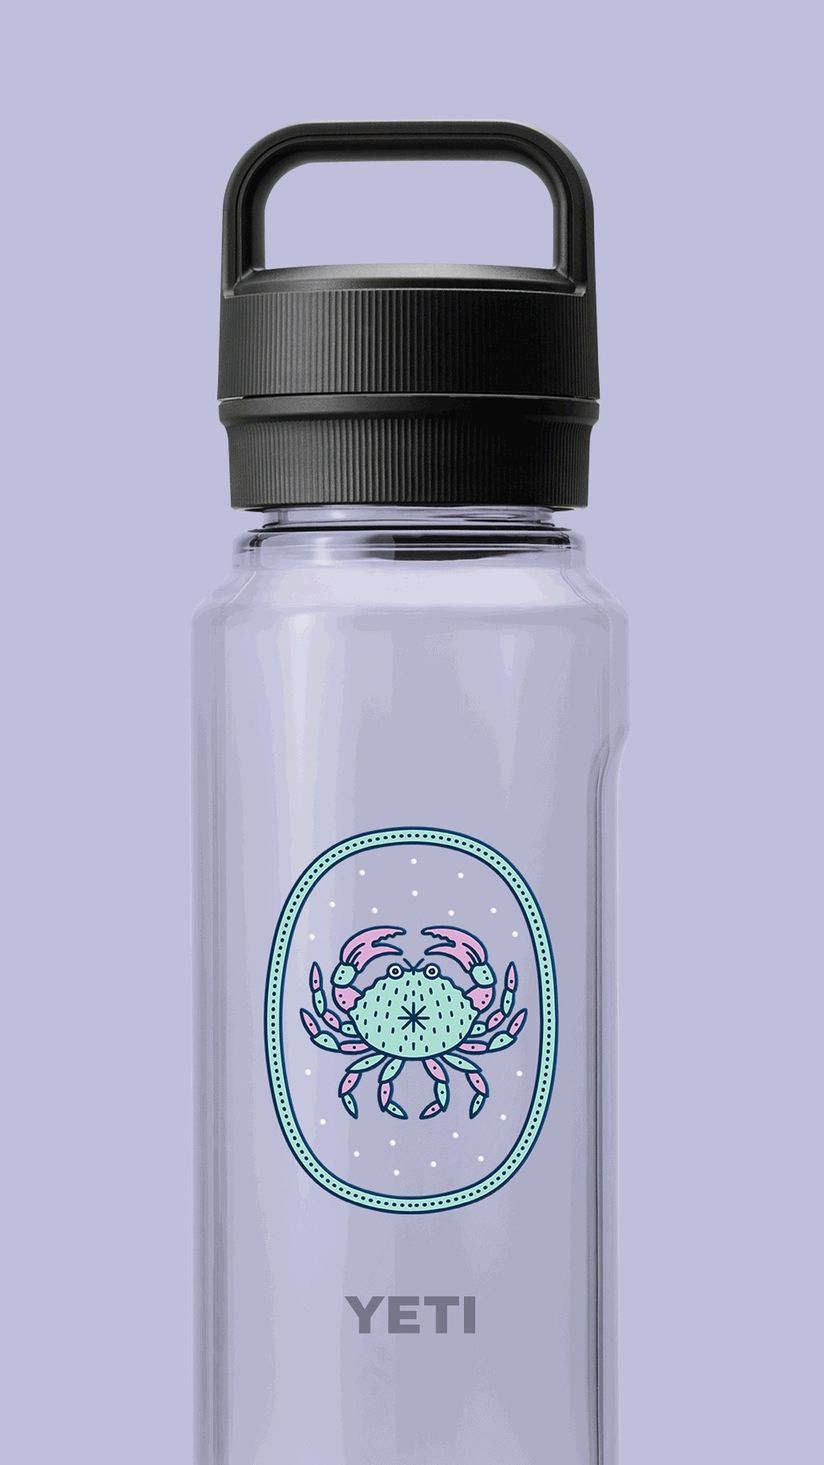 https://www.brit.co/media-library/yeti-yonder-bottle-with-zodiac-sign-new-yeti-colors.jpg?id=34682195&width=824&quality=90